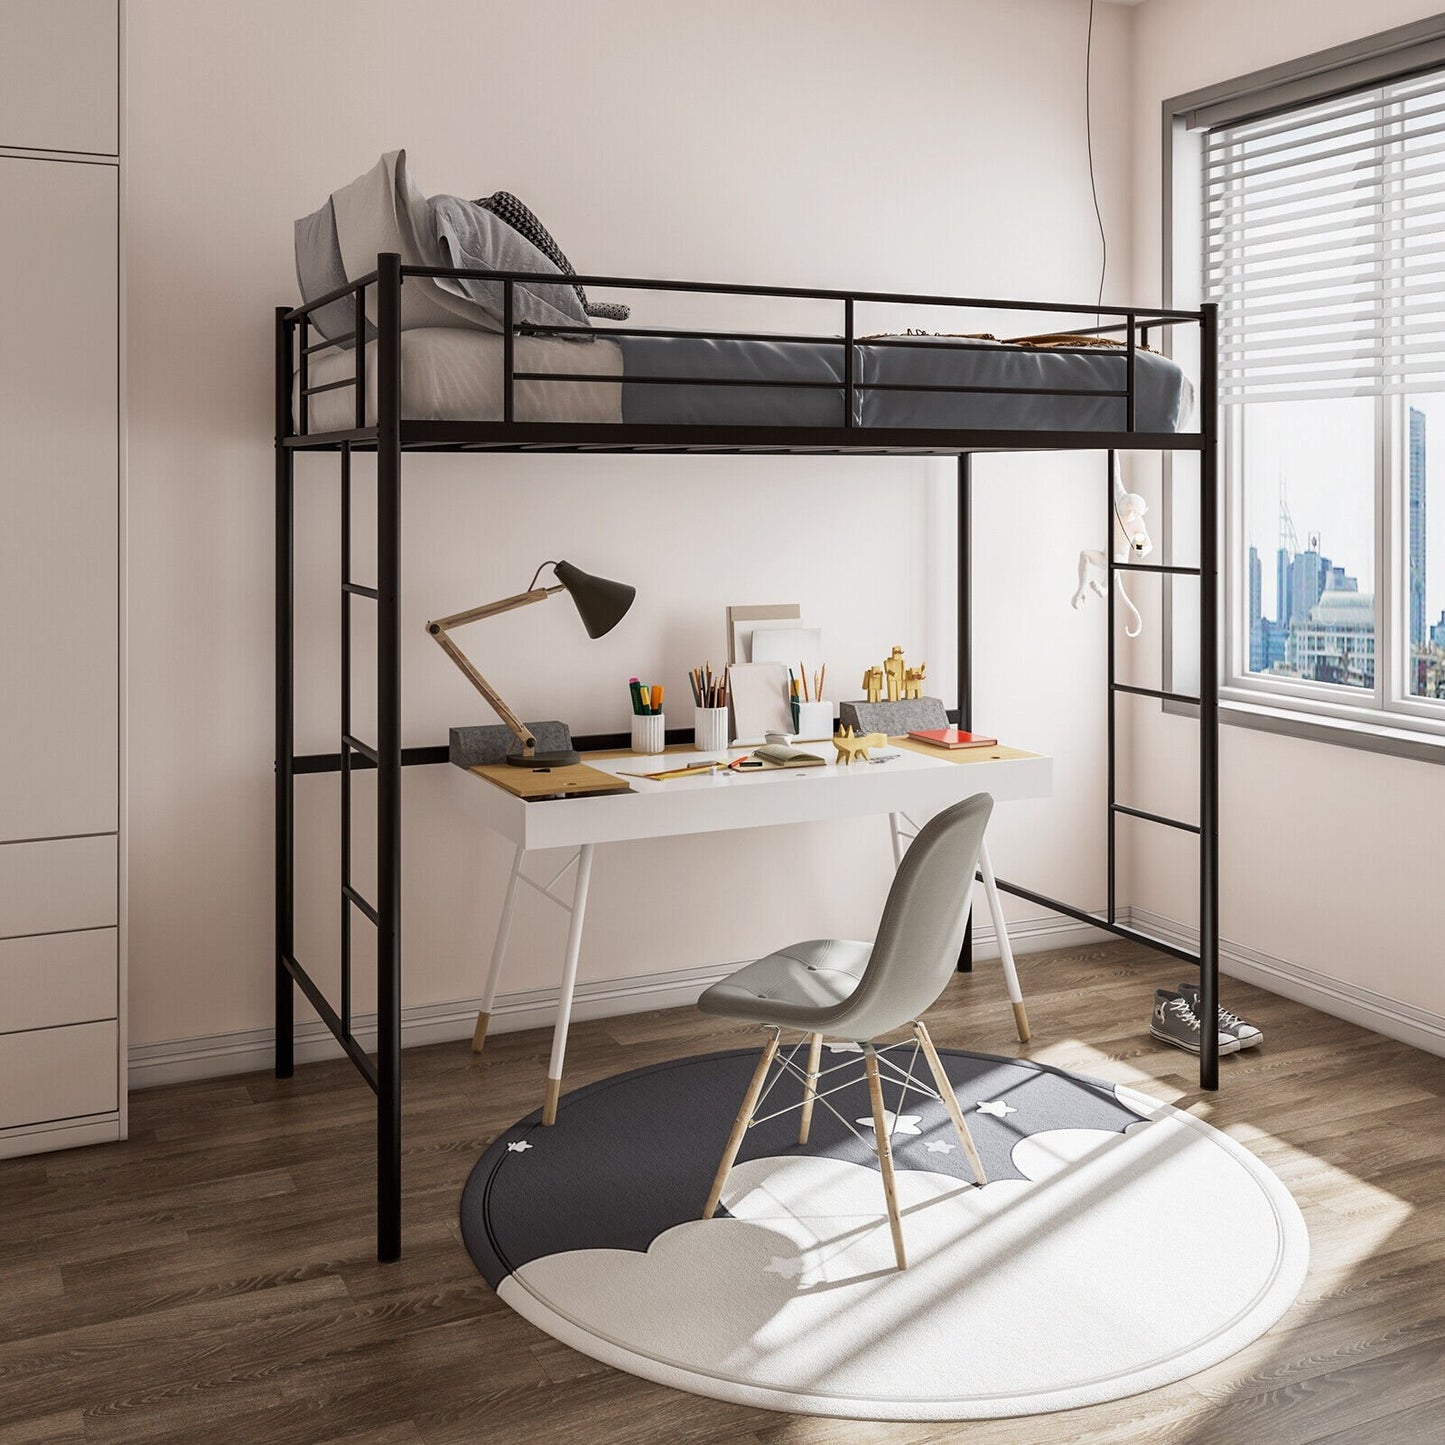 Twin Size Space-saving Metal Loft Bed with Full-Length Guardrail and 2 Ladders, Black